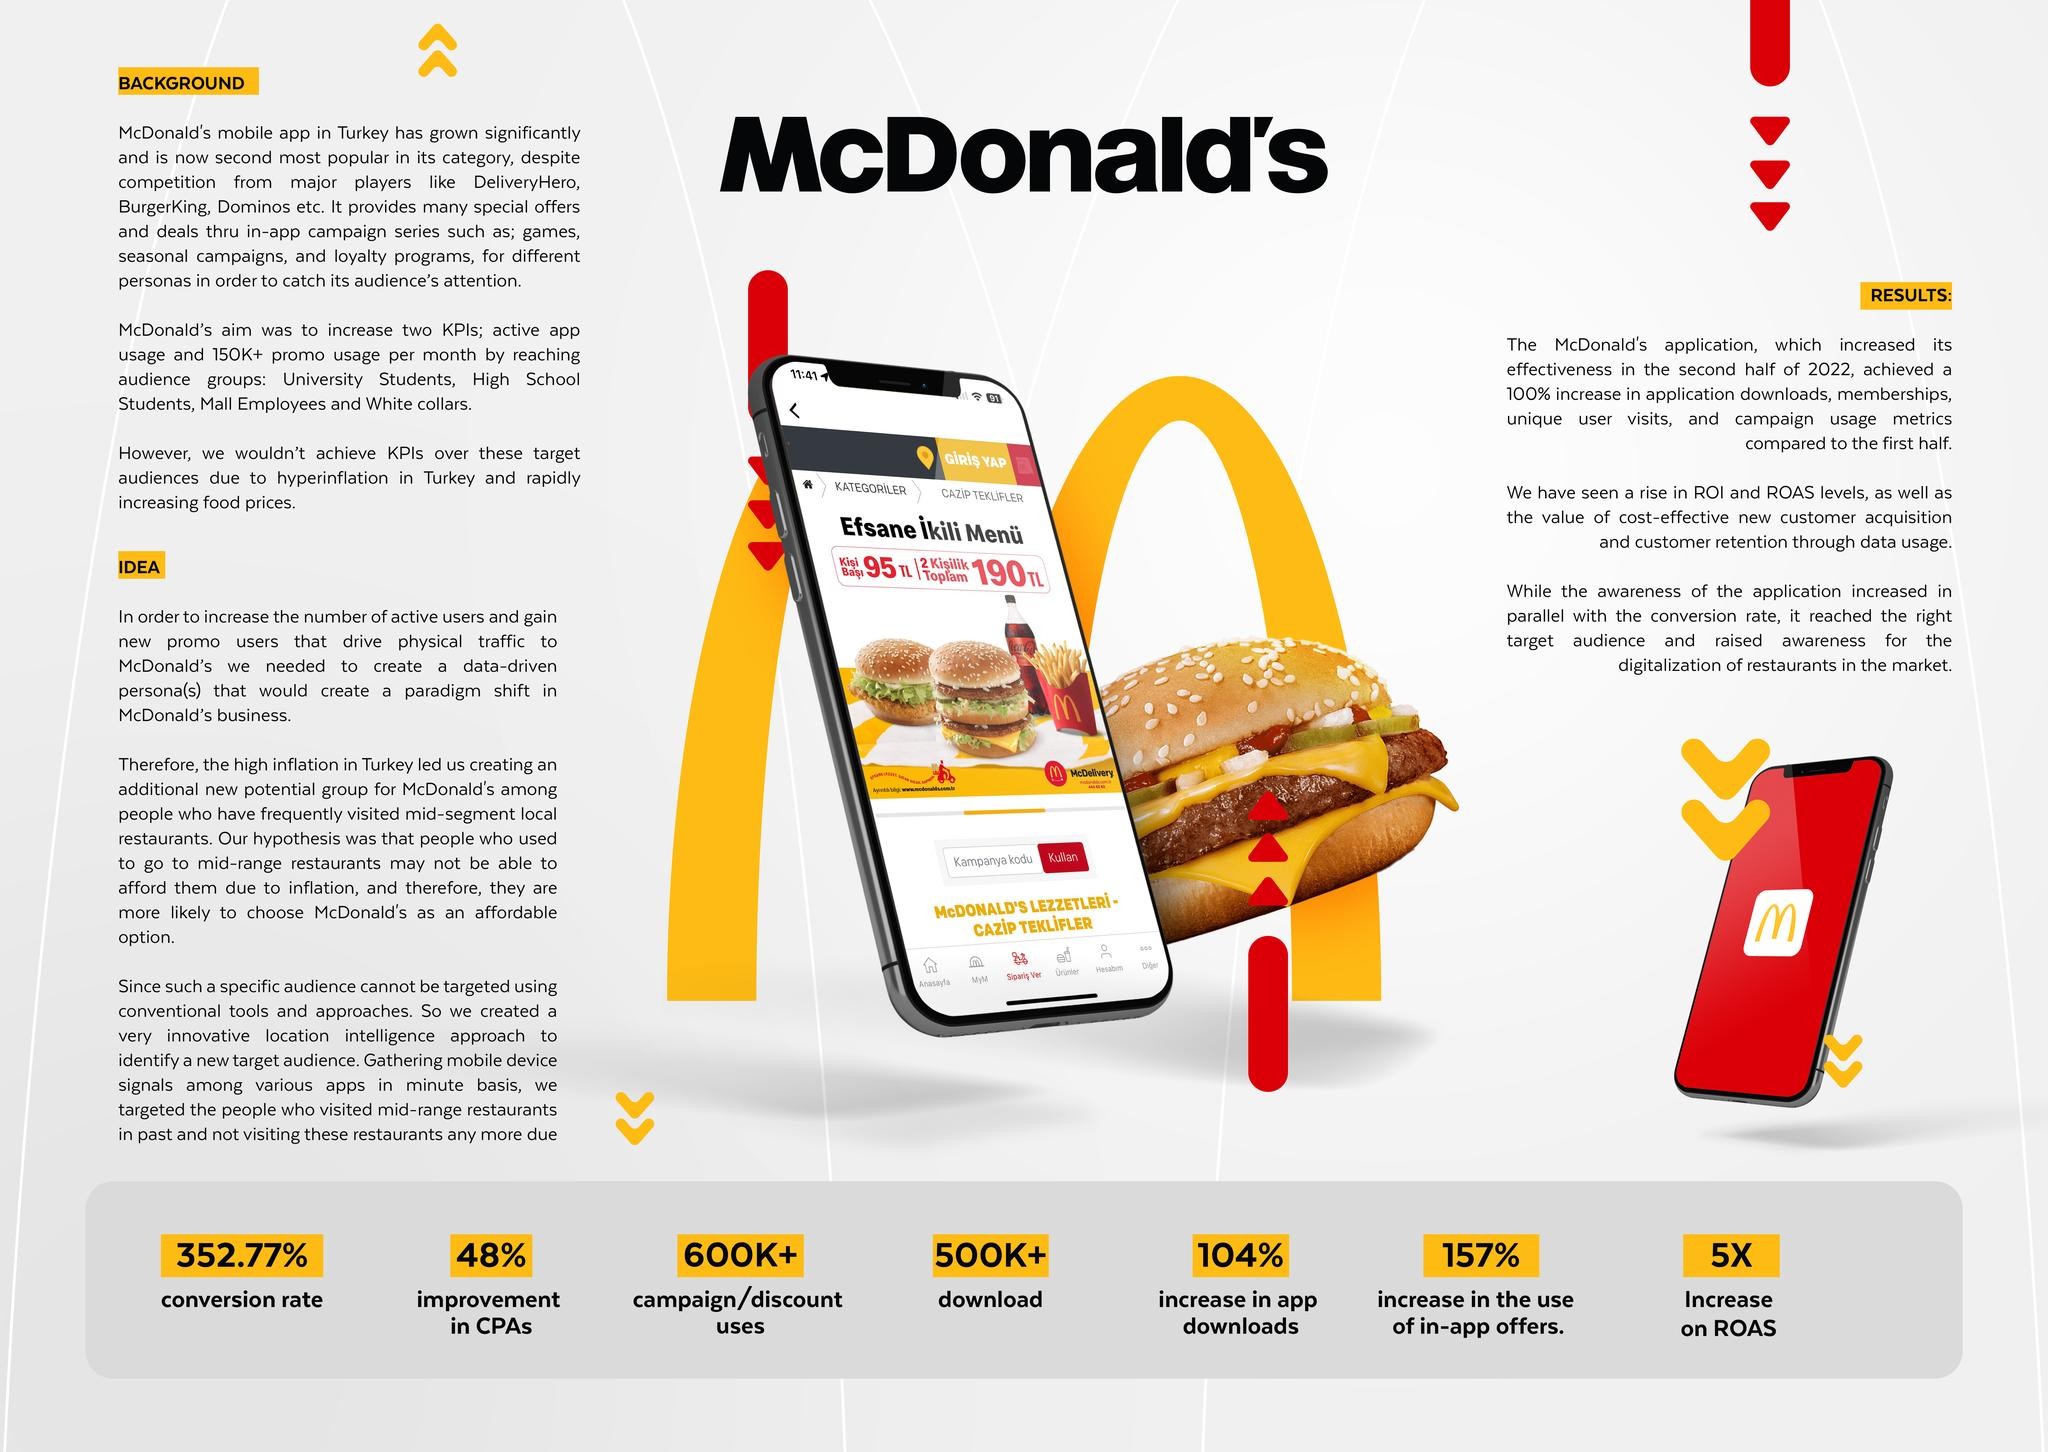 McDonald's - Consumer Redefined With Data